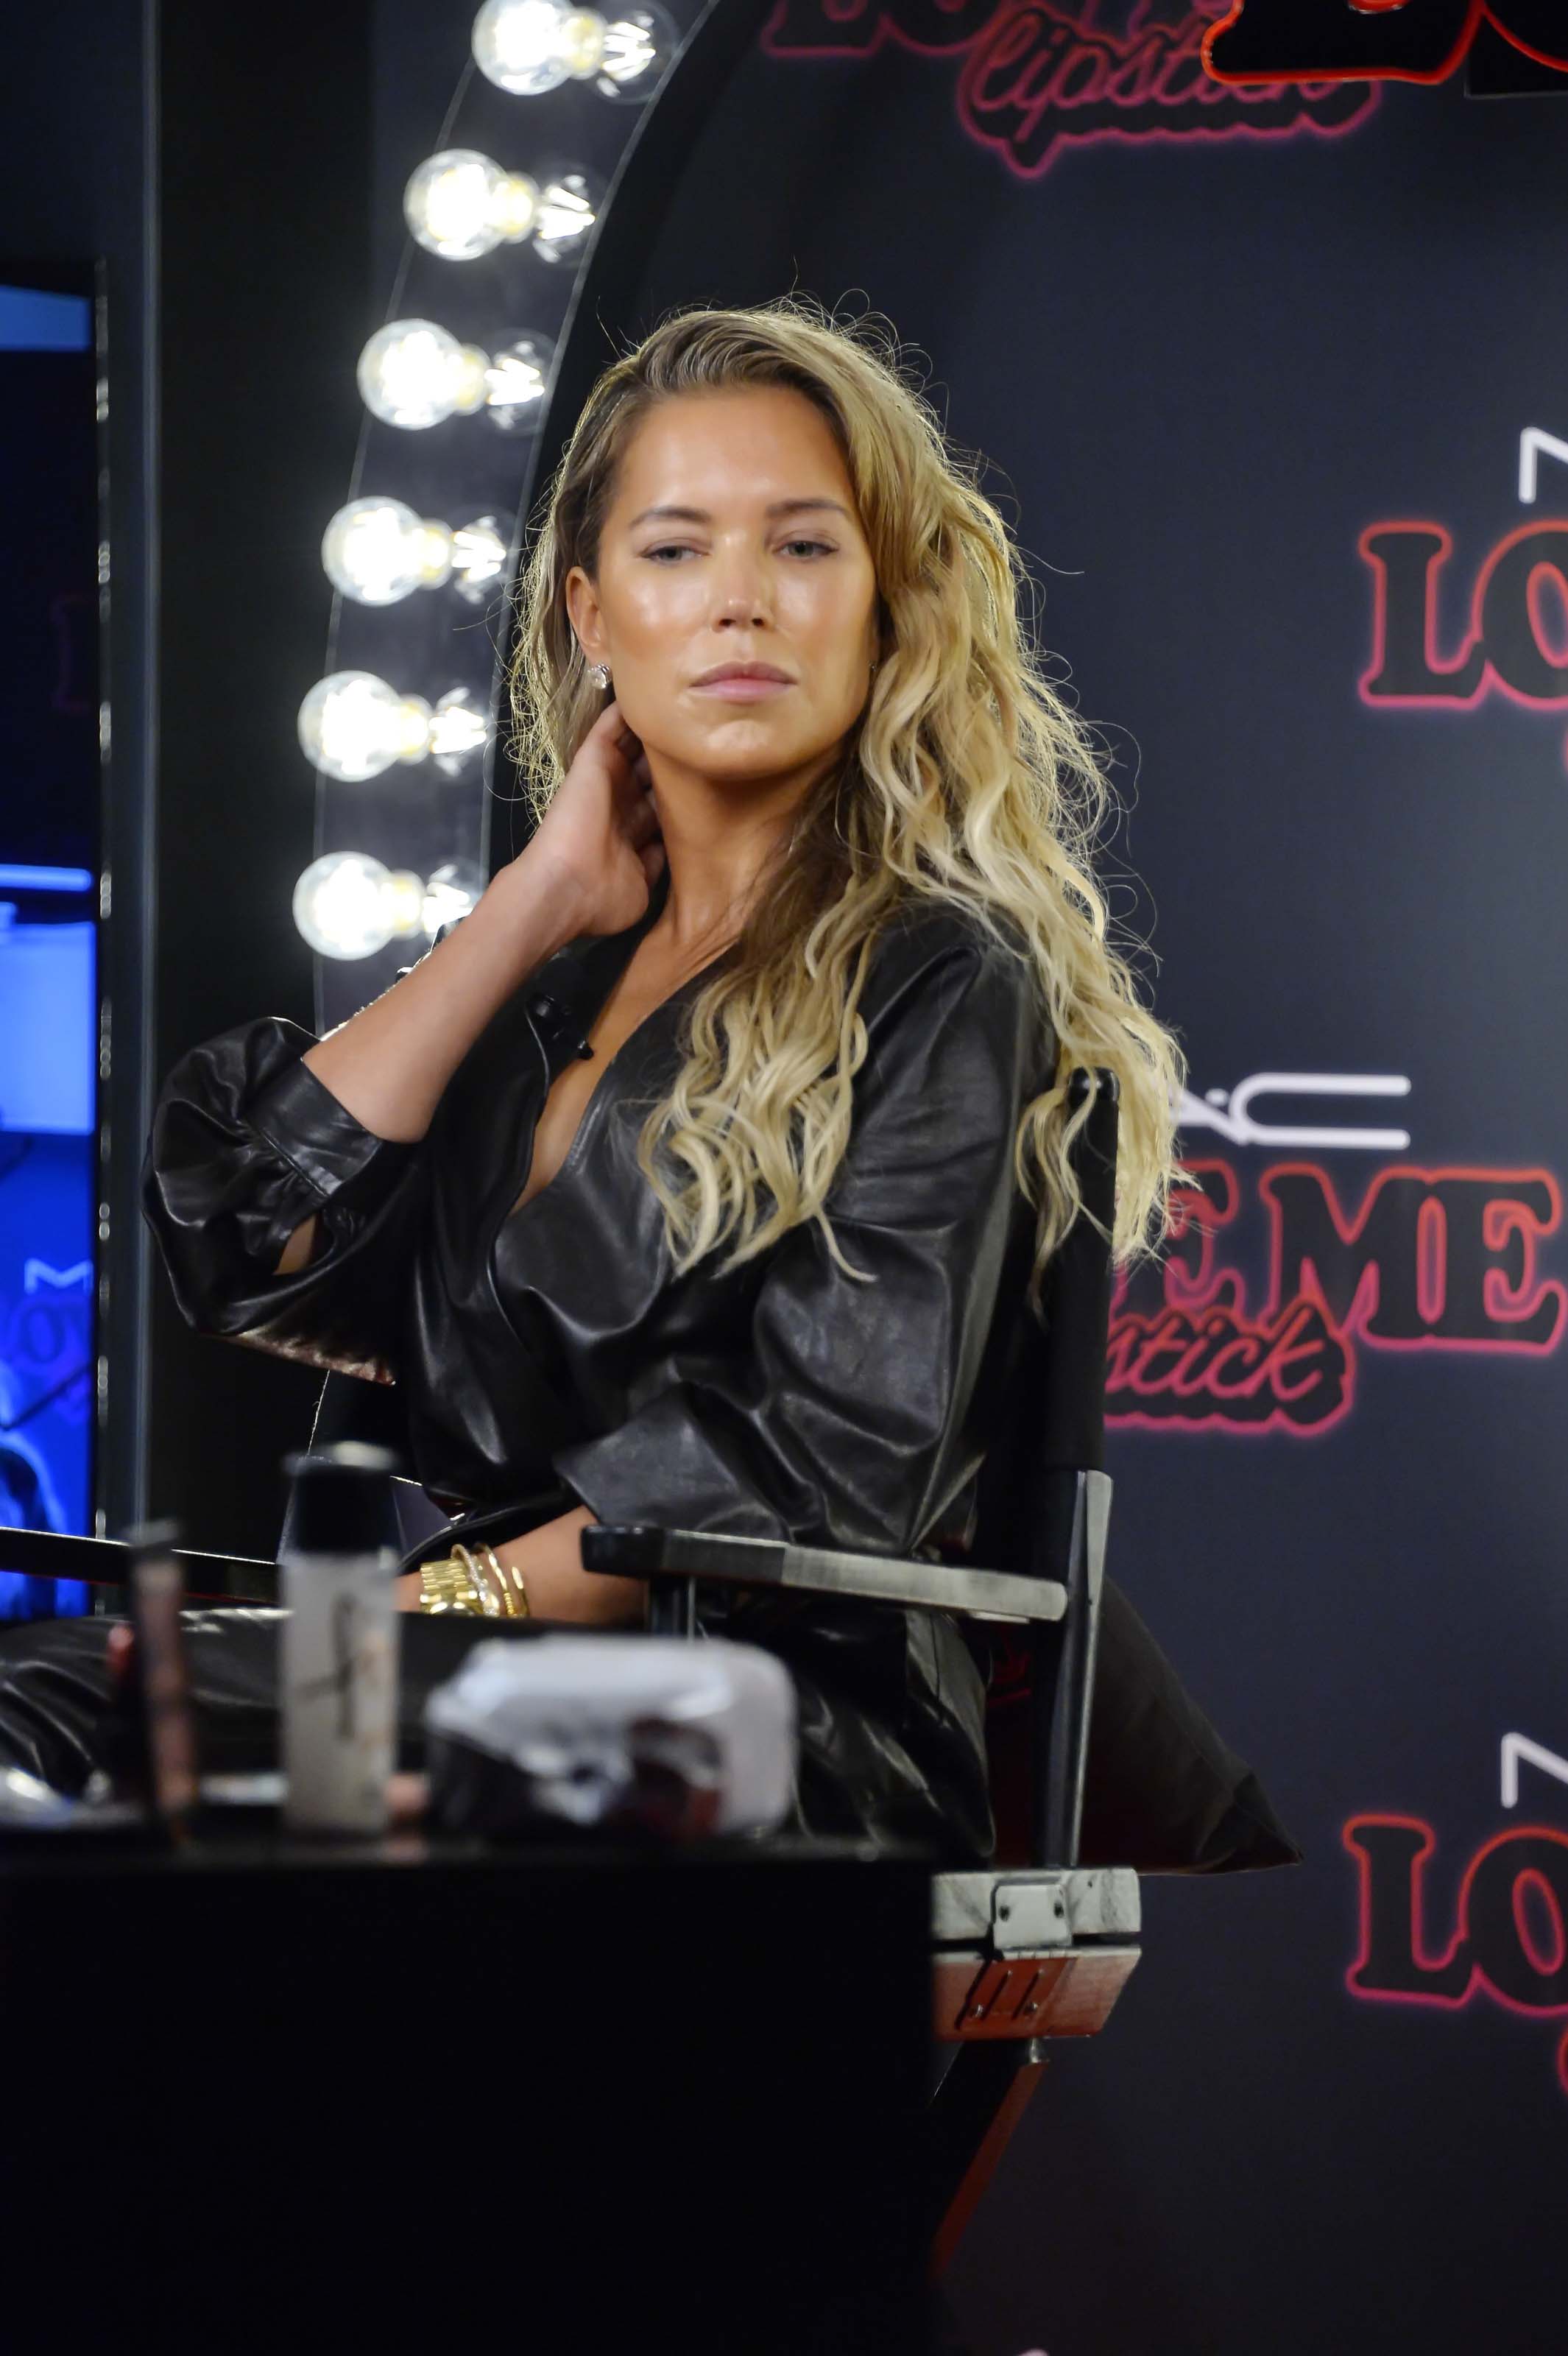 Sylvie Meis attends MAC Cosmetic Kunden Event